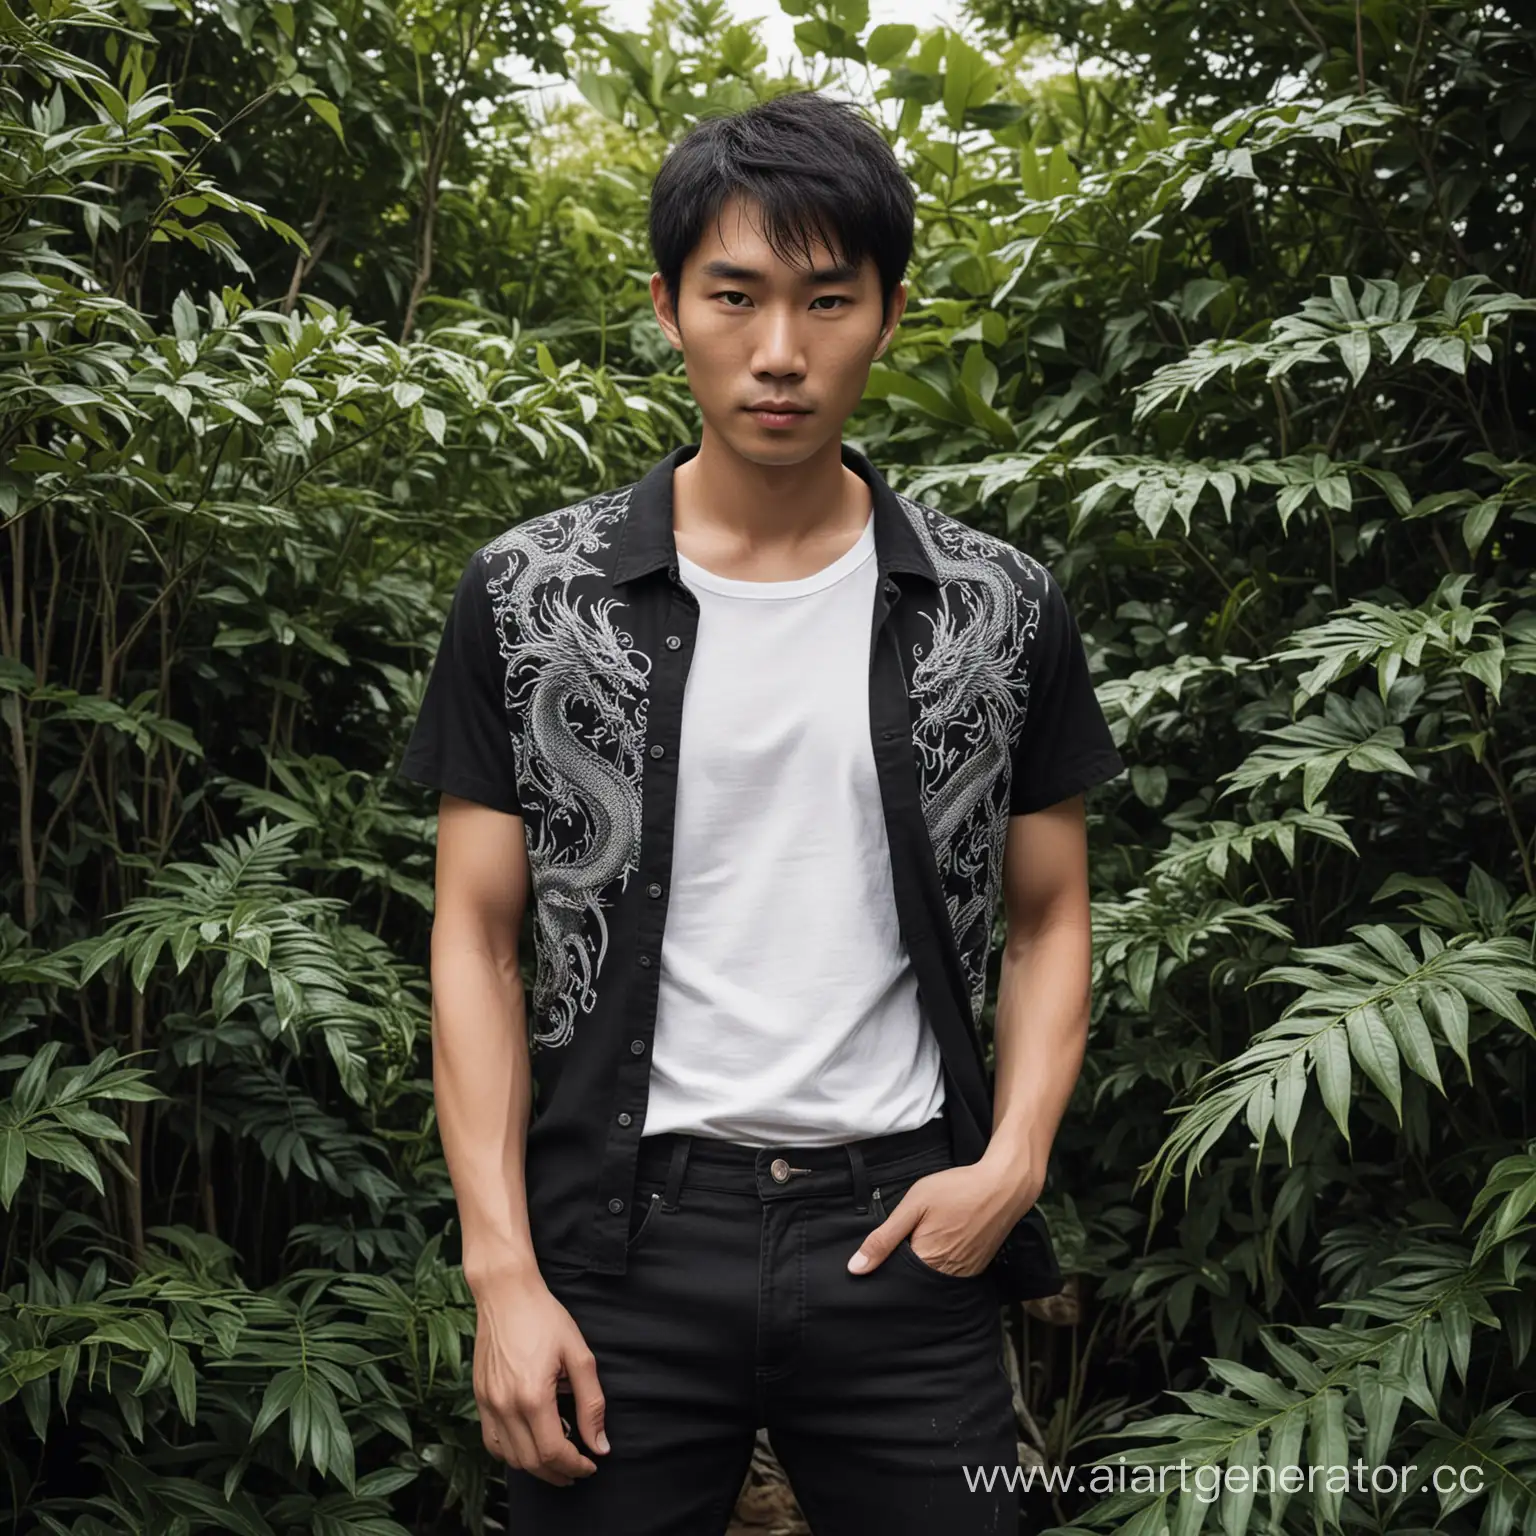 Asian-Man-Emerges-from-Bushes-in-DragonPrint-Shirt-and-Jeans